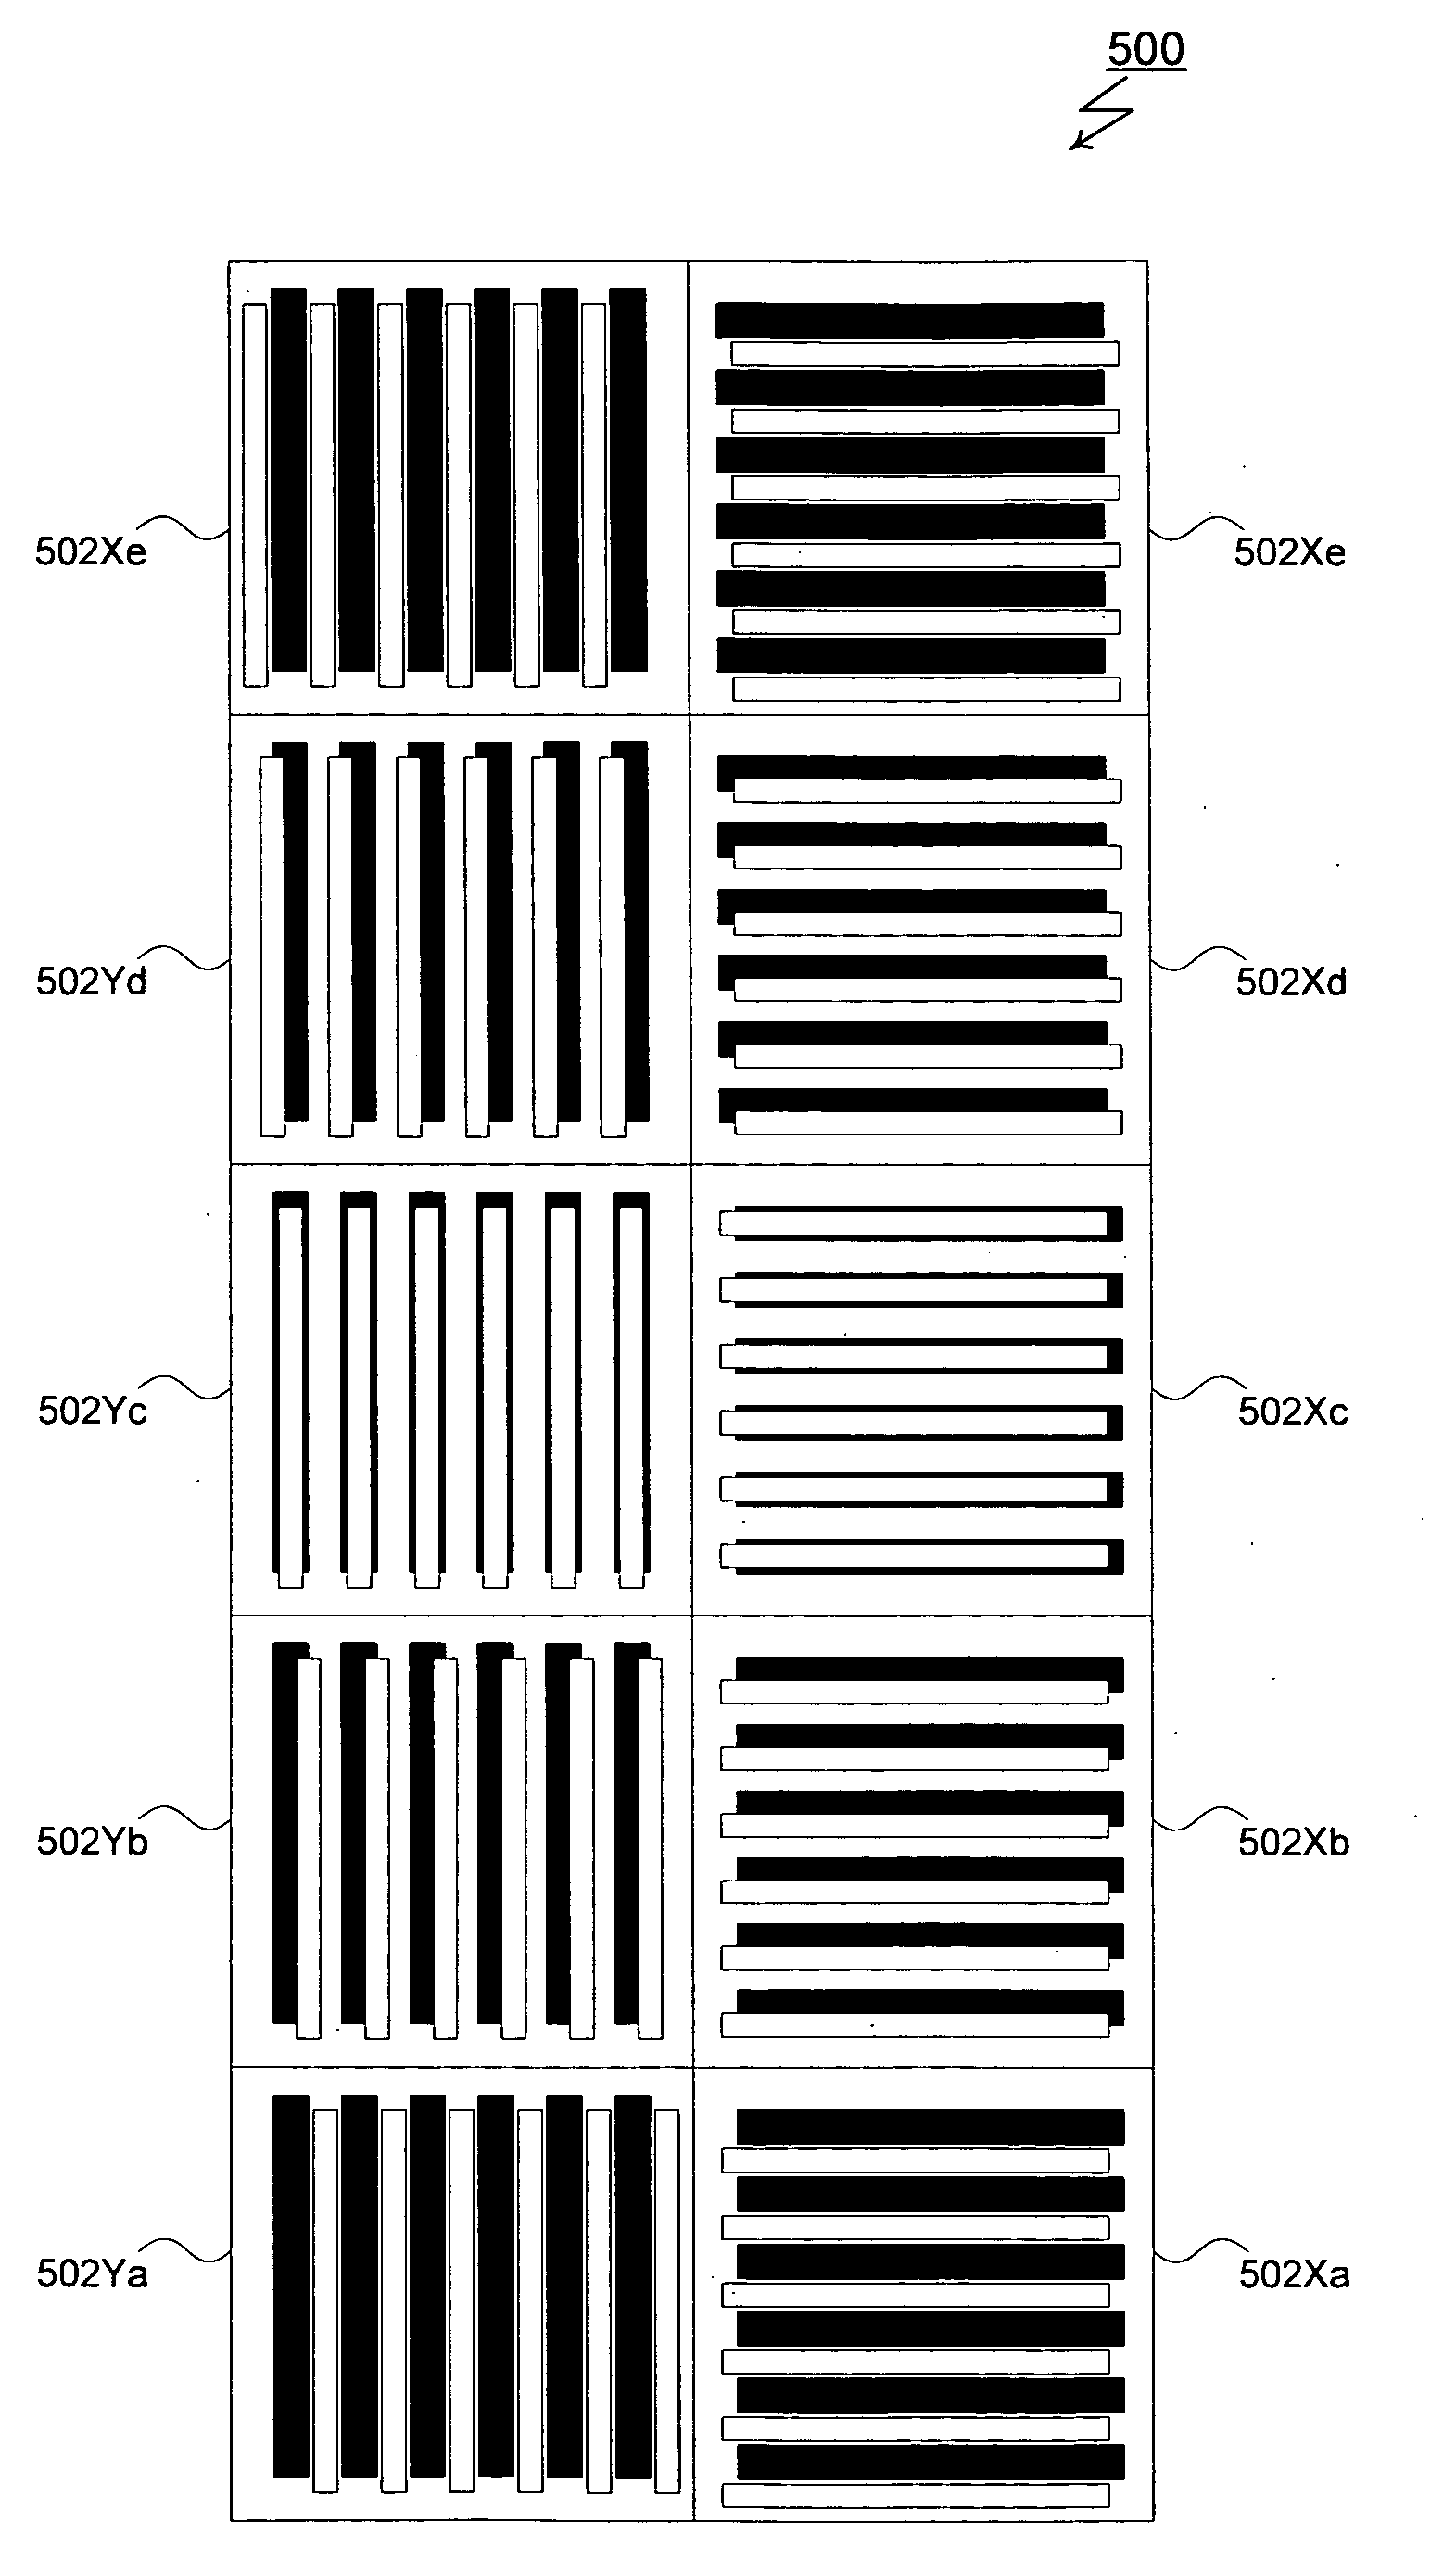 Apparatus and method for measuring overlay by diffraction gratings